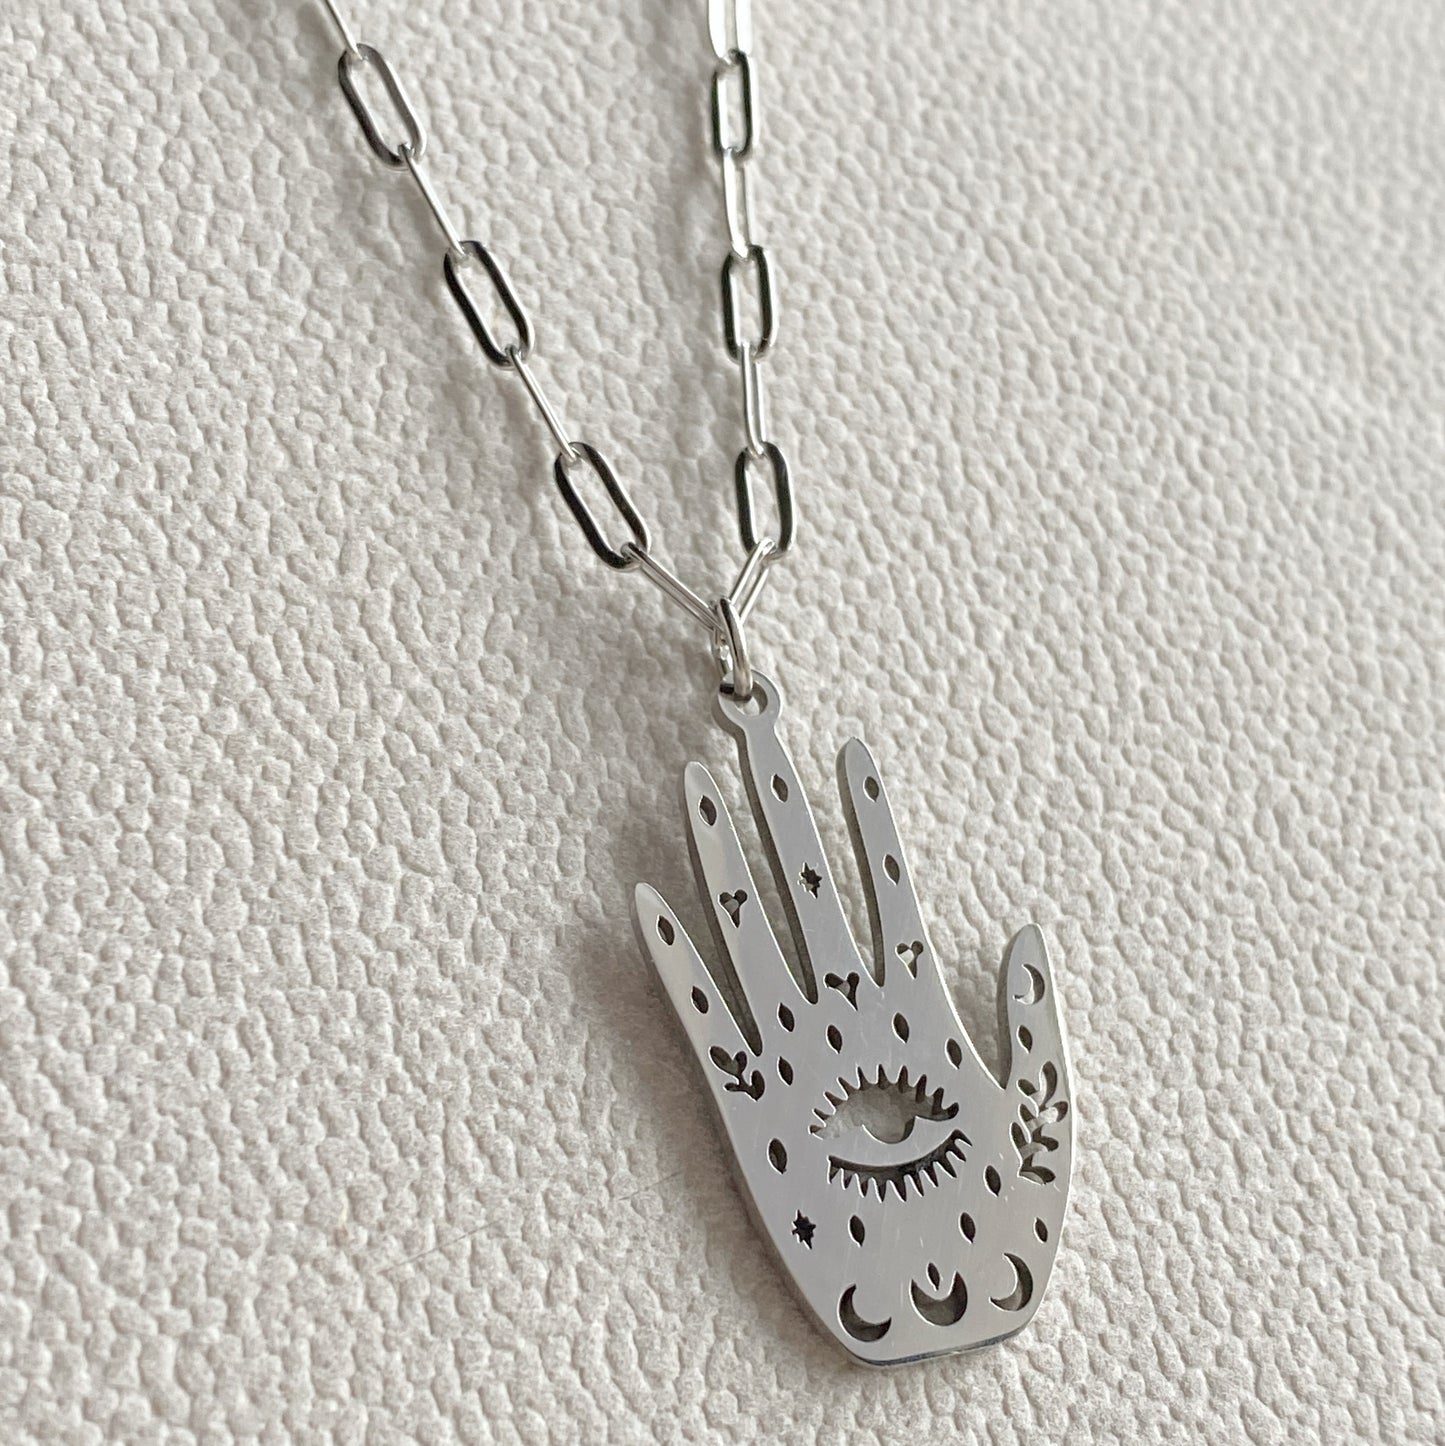 Celestial Hand Tarot Stainless Steel Silver Waterproof Necklace